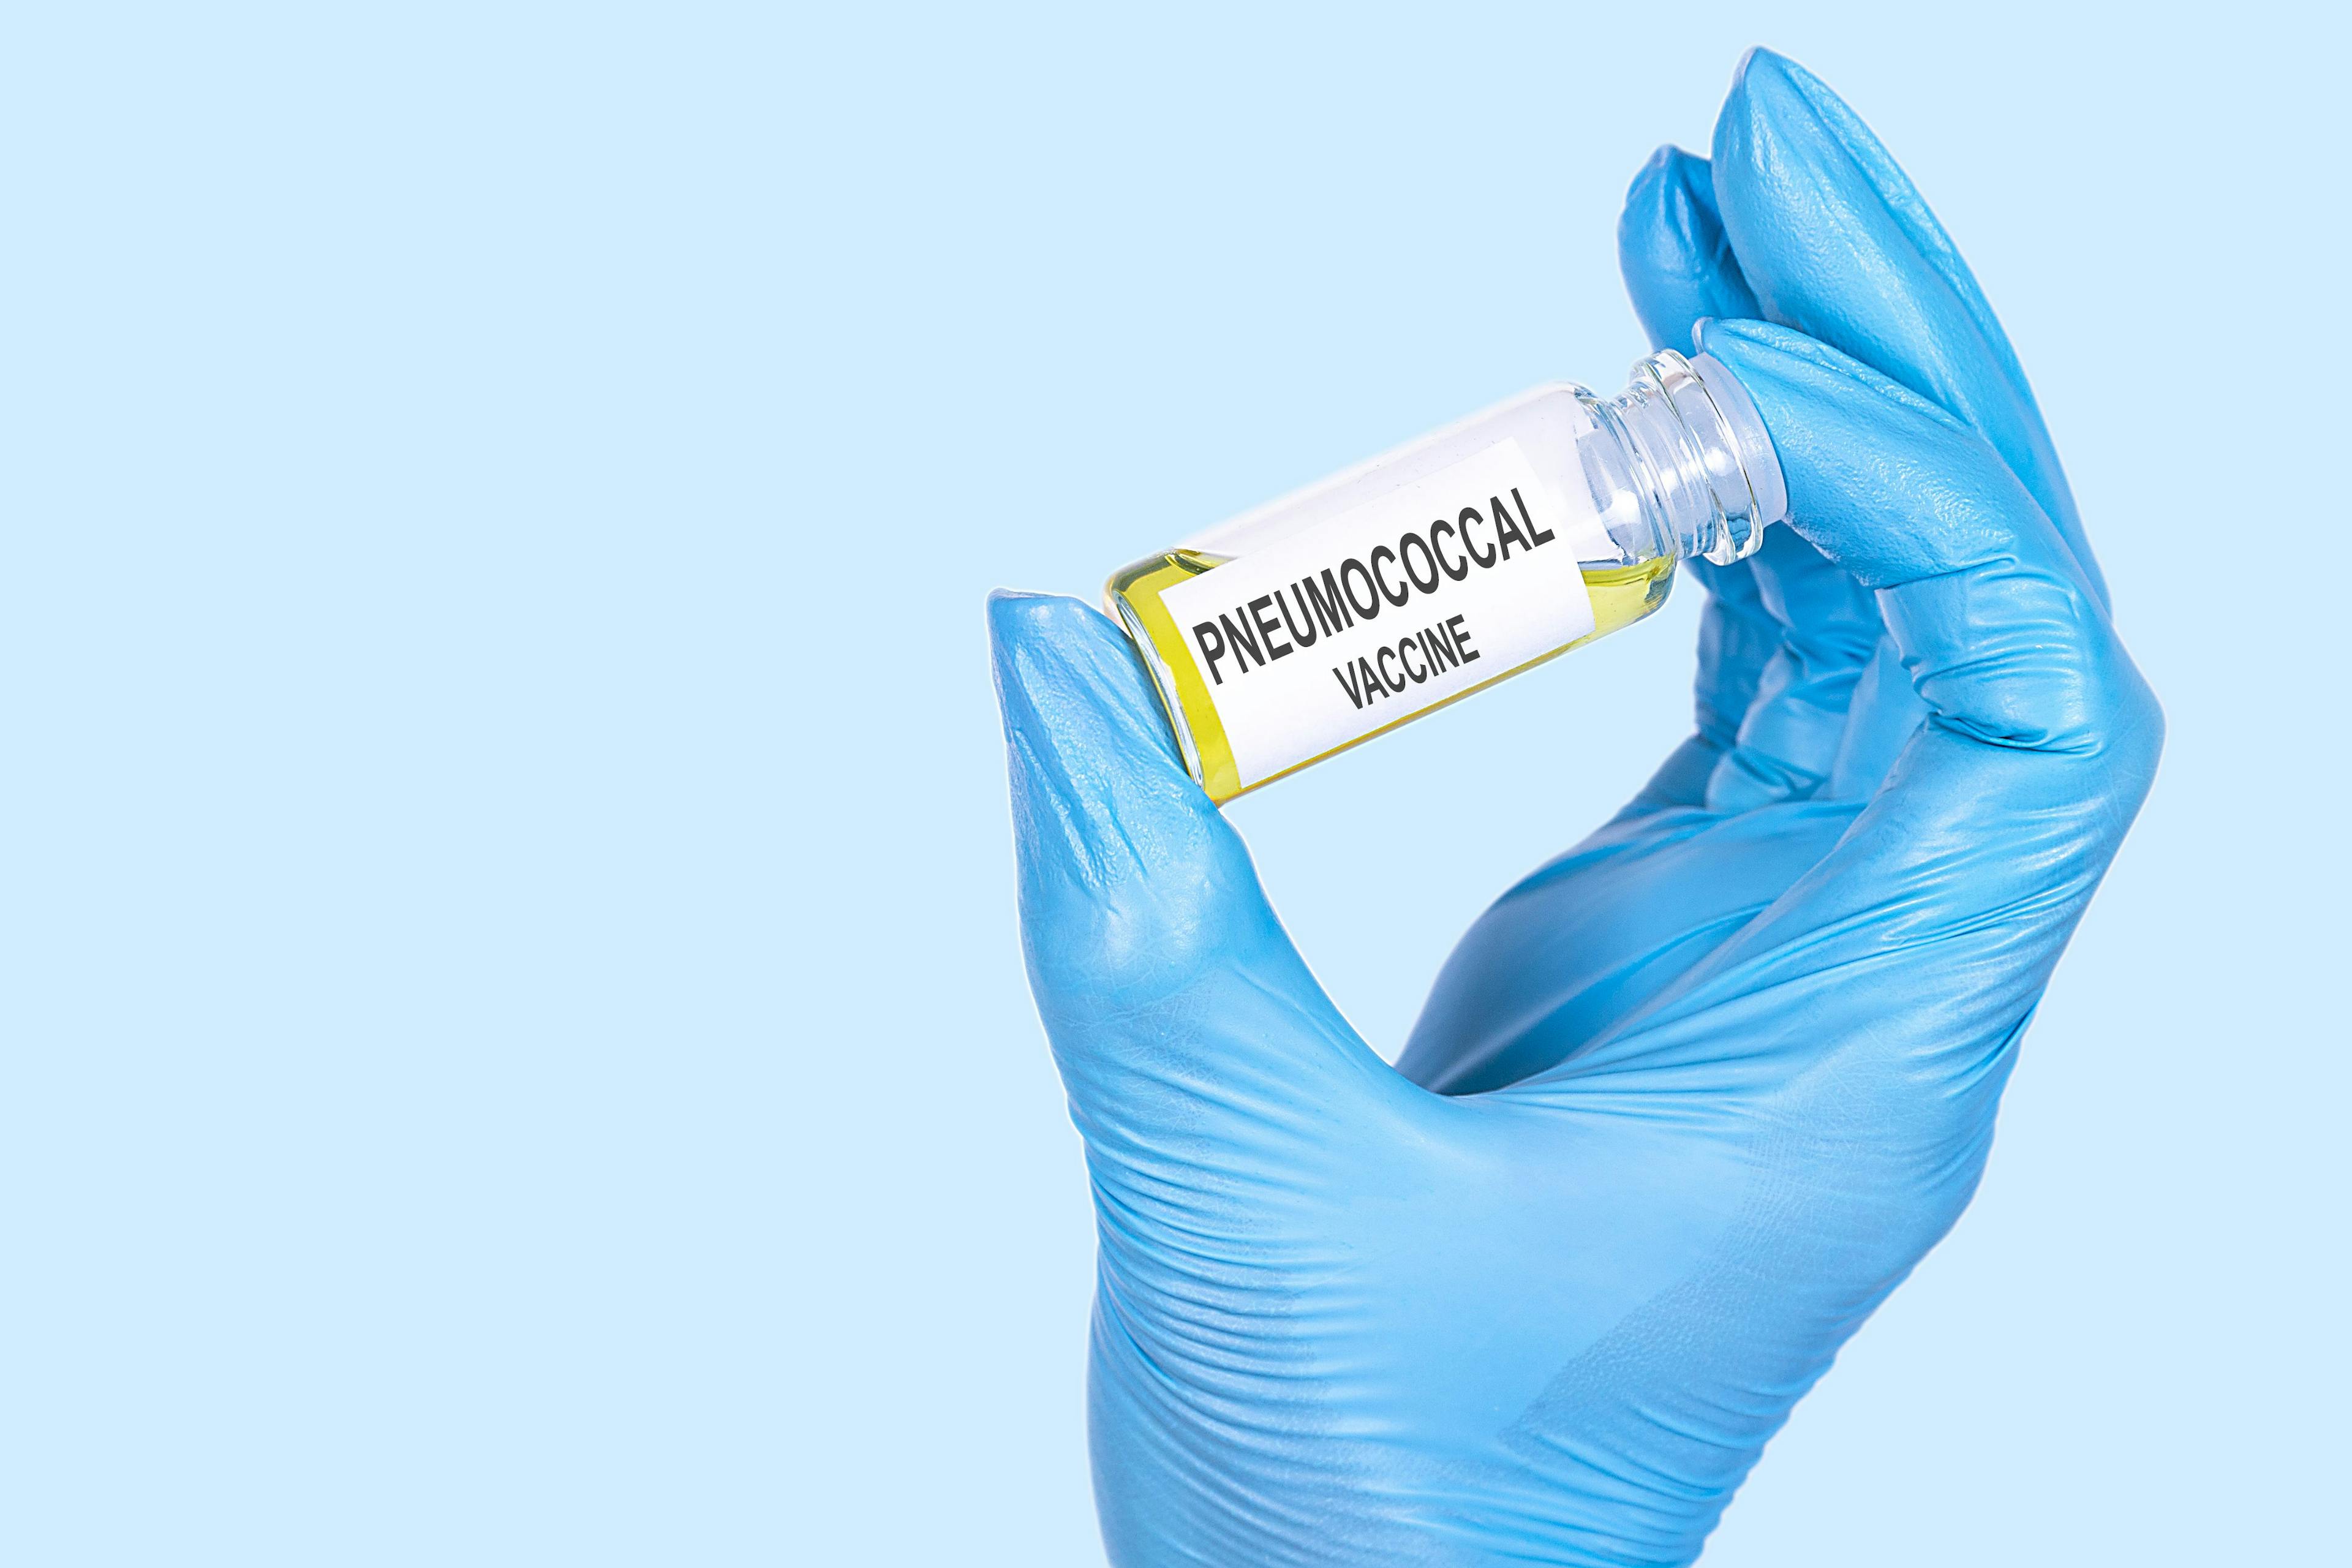 PNEUMOCOCCAL VACCINE text is written on a vial whose ampoule is held by a hand in a medical disposable glove. | Image Credit: Iryna - stock.adobe.com